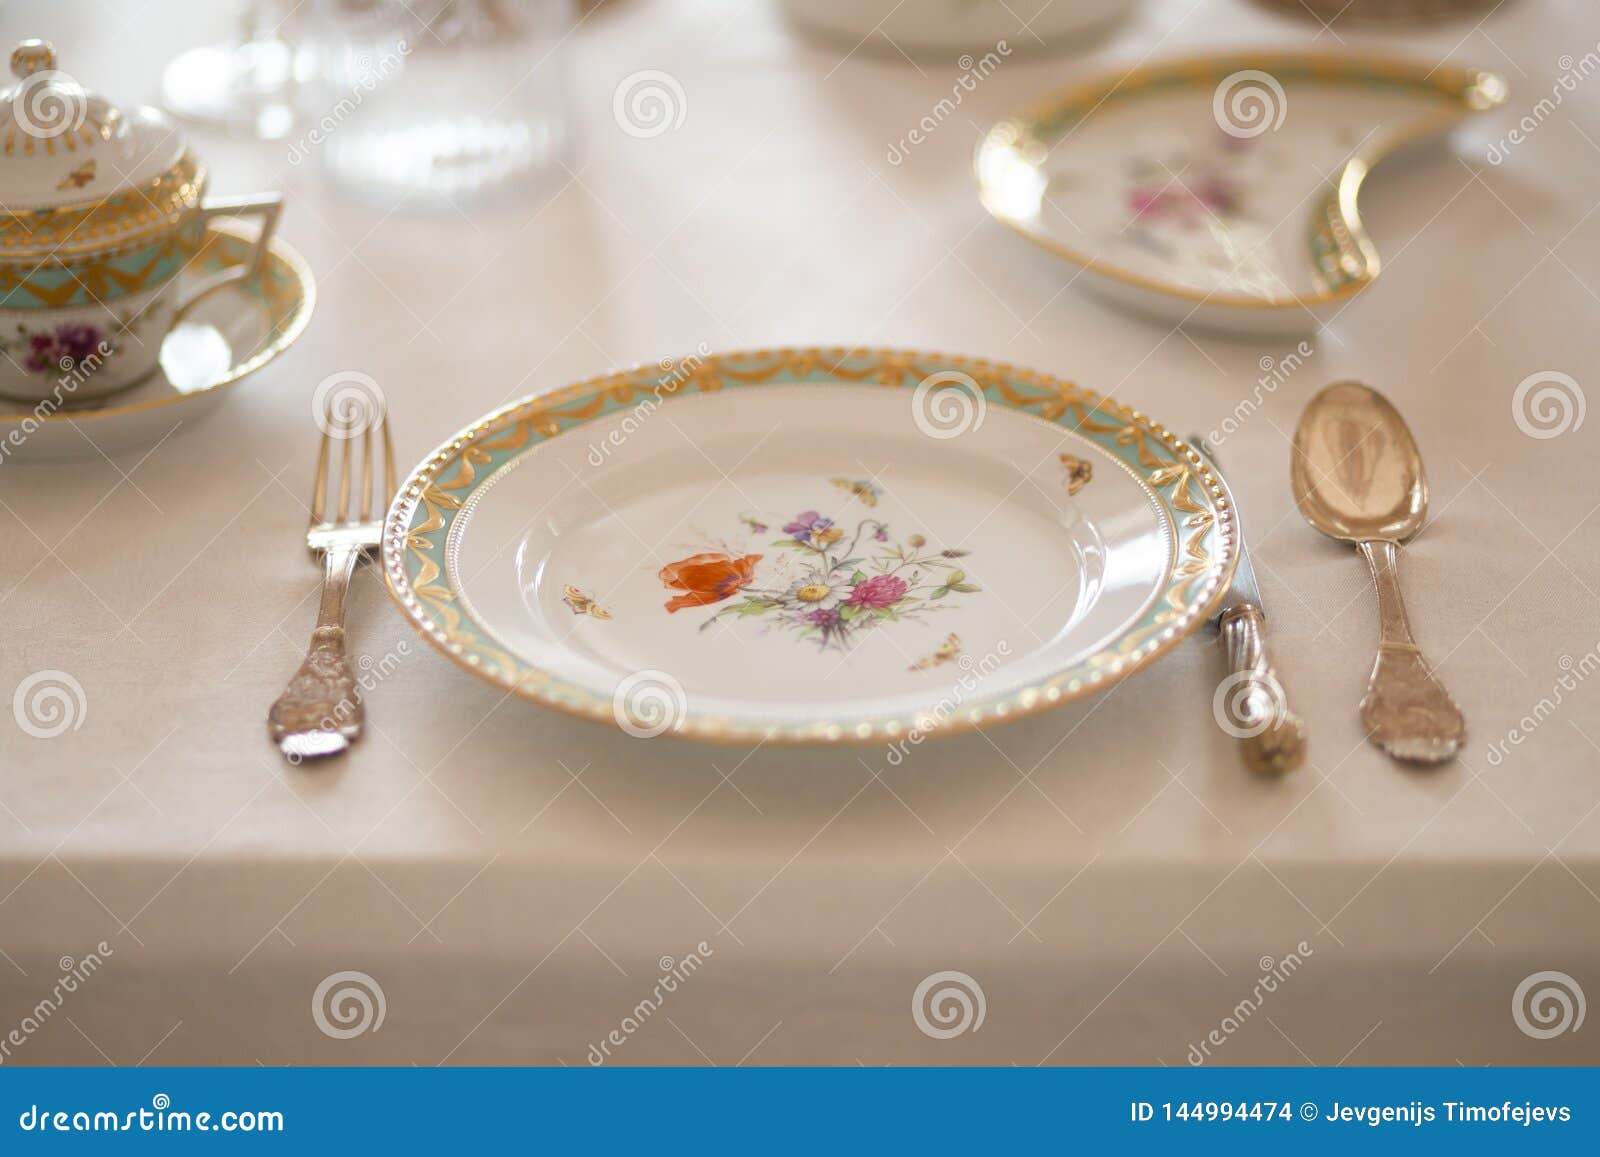 Wedding Table Decoration with Expensive Retro Royal Majesty Porcelain ...